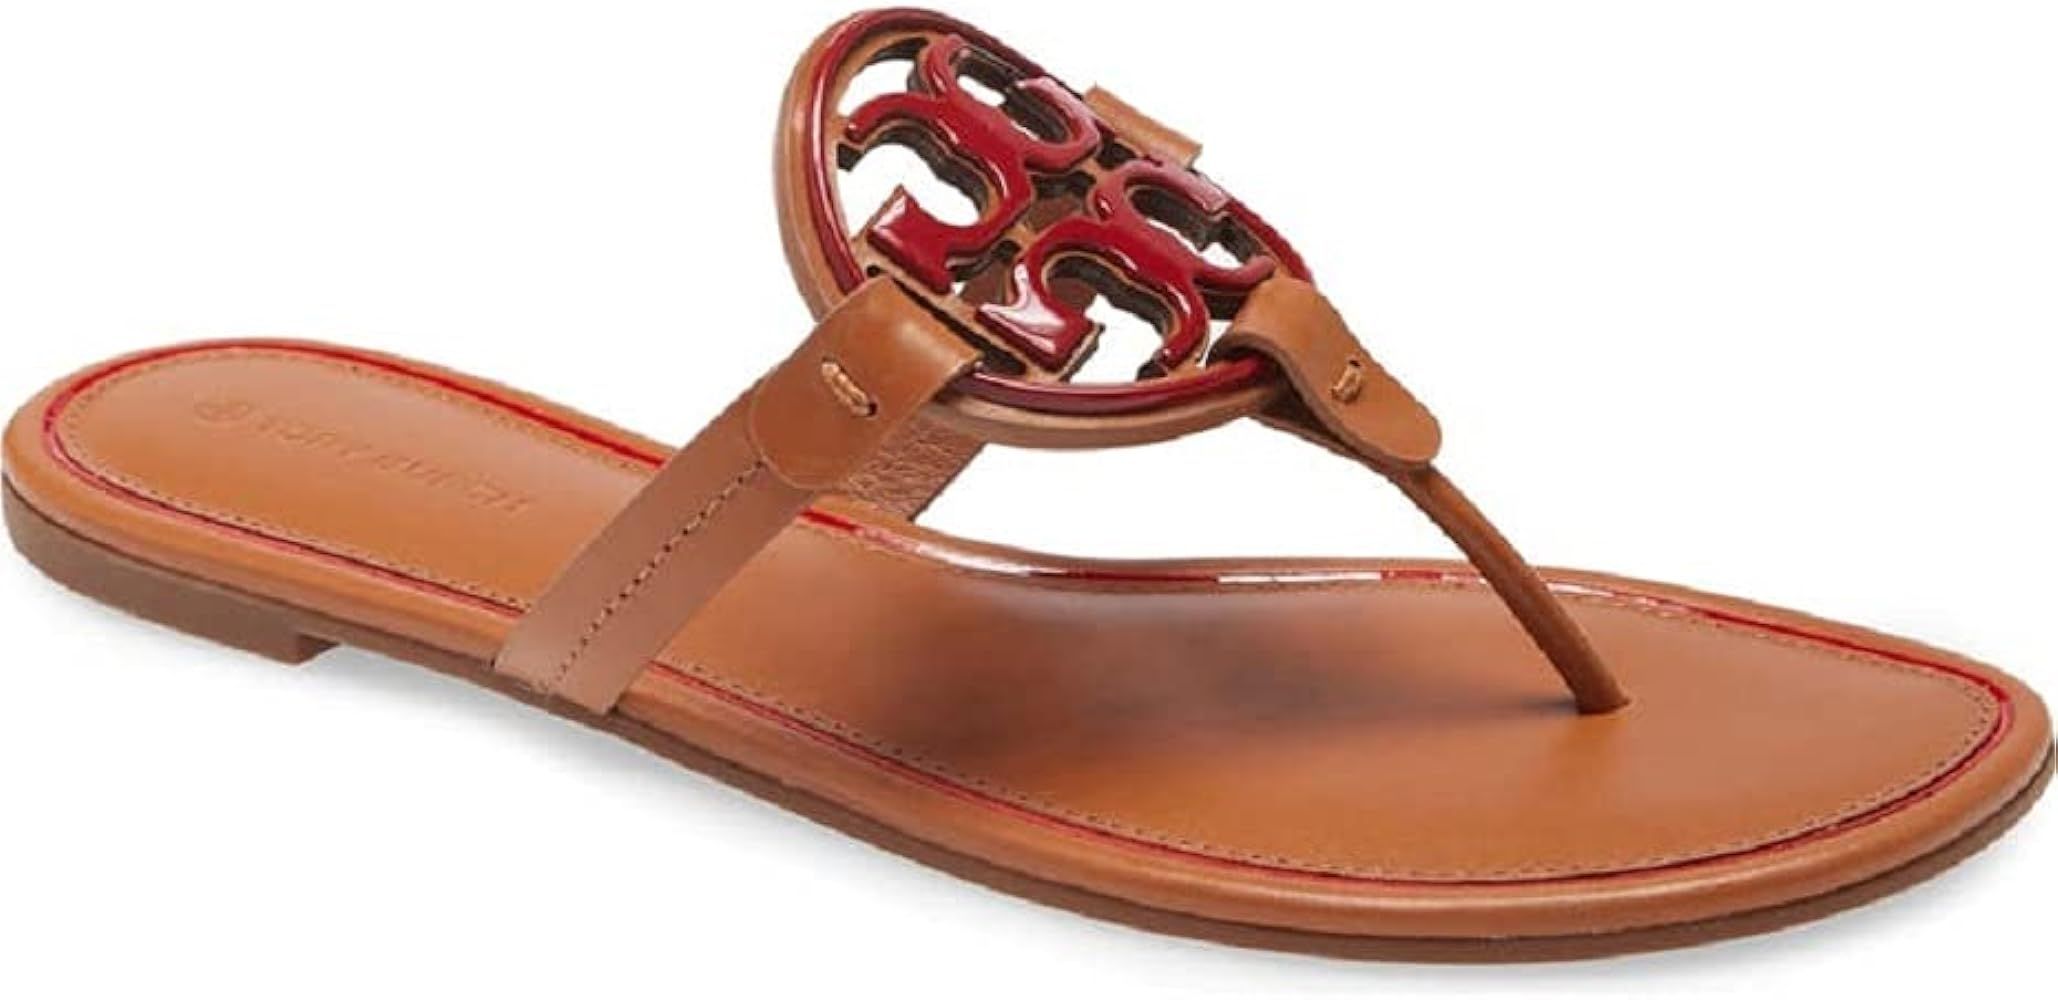 Tory Burch Women's Ambra Tory Red Metal Miller Sandals Shoes | Amazon (US)